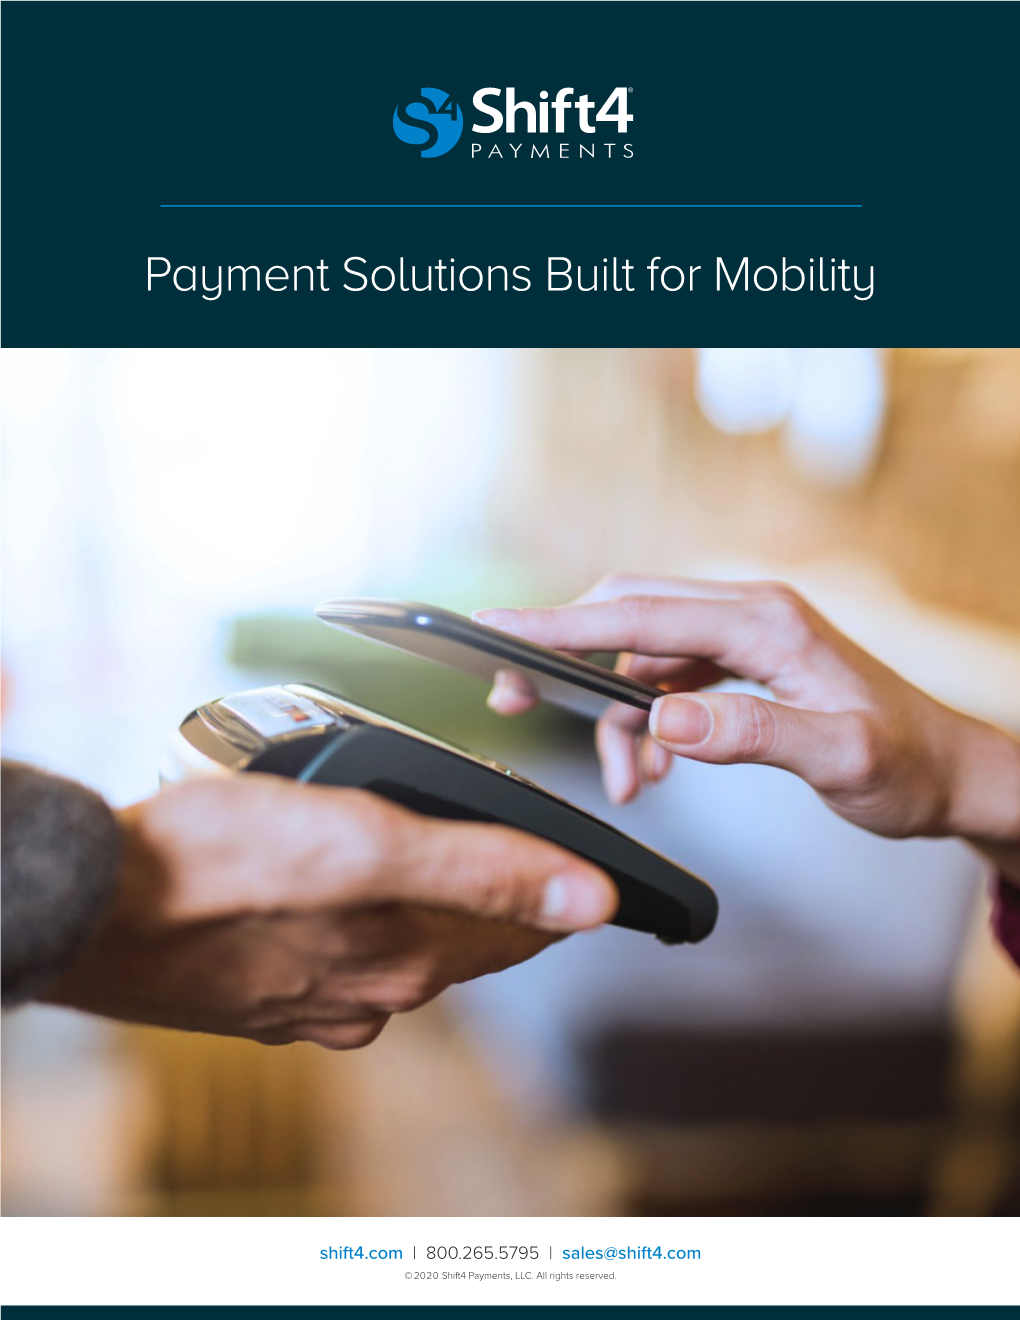 Payment Solutions Built for Mobility